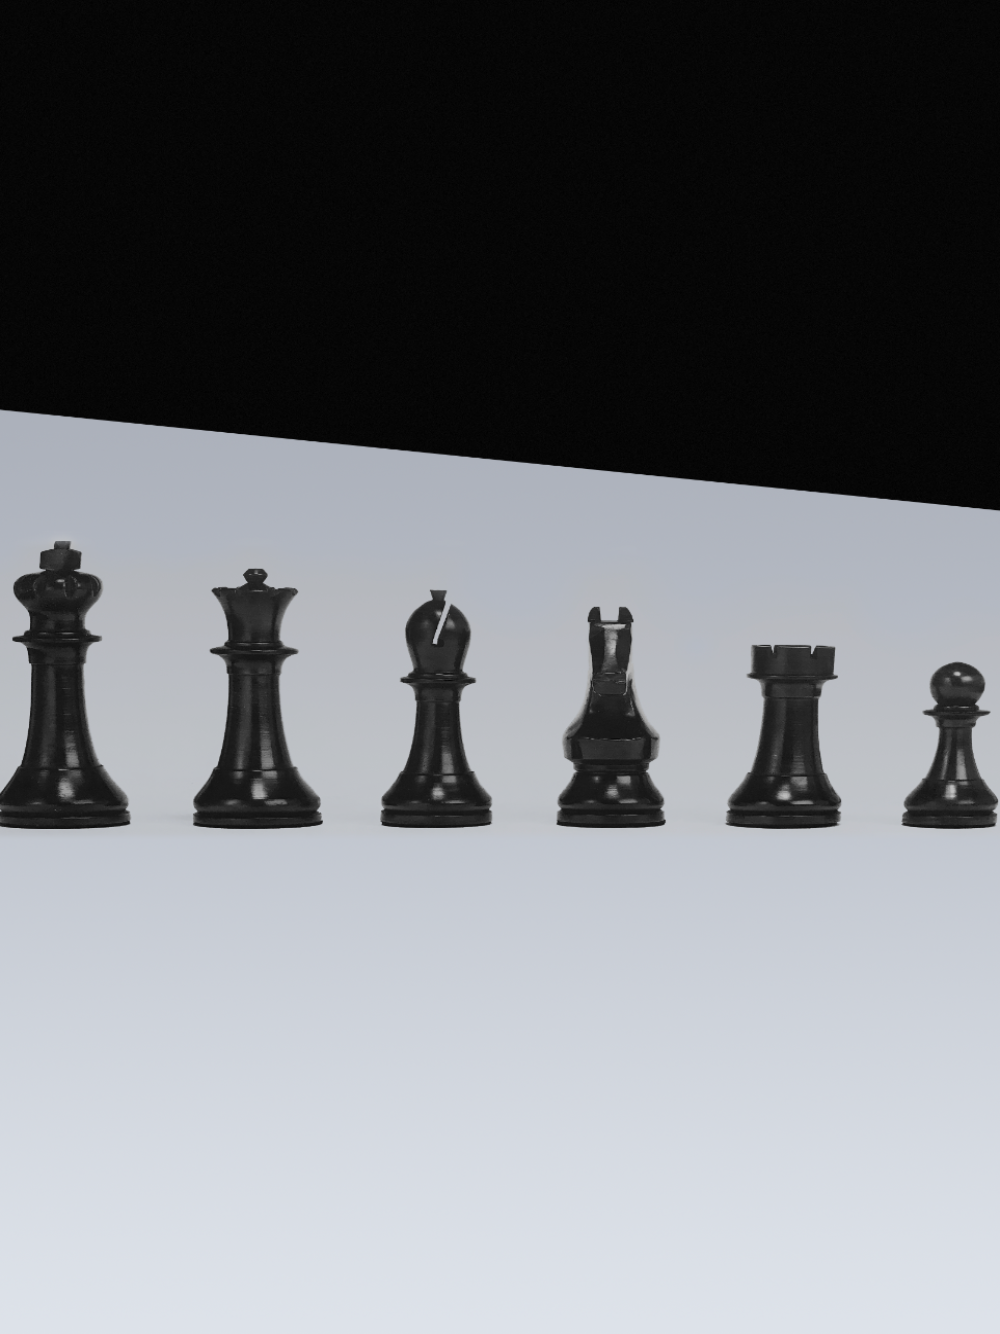 Single Piece (Replacement) for the Official World Chess Studio Pieces